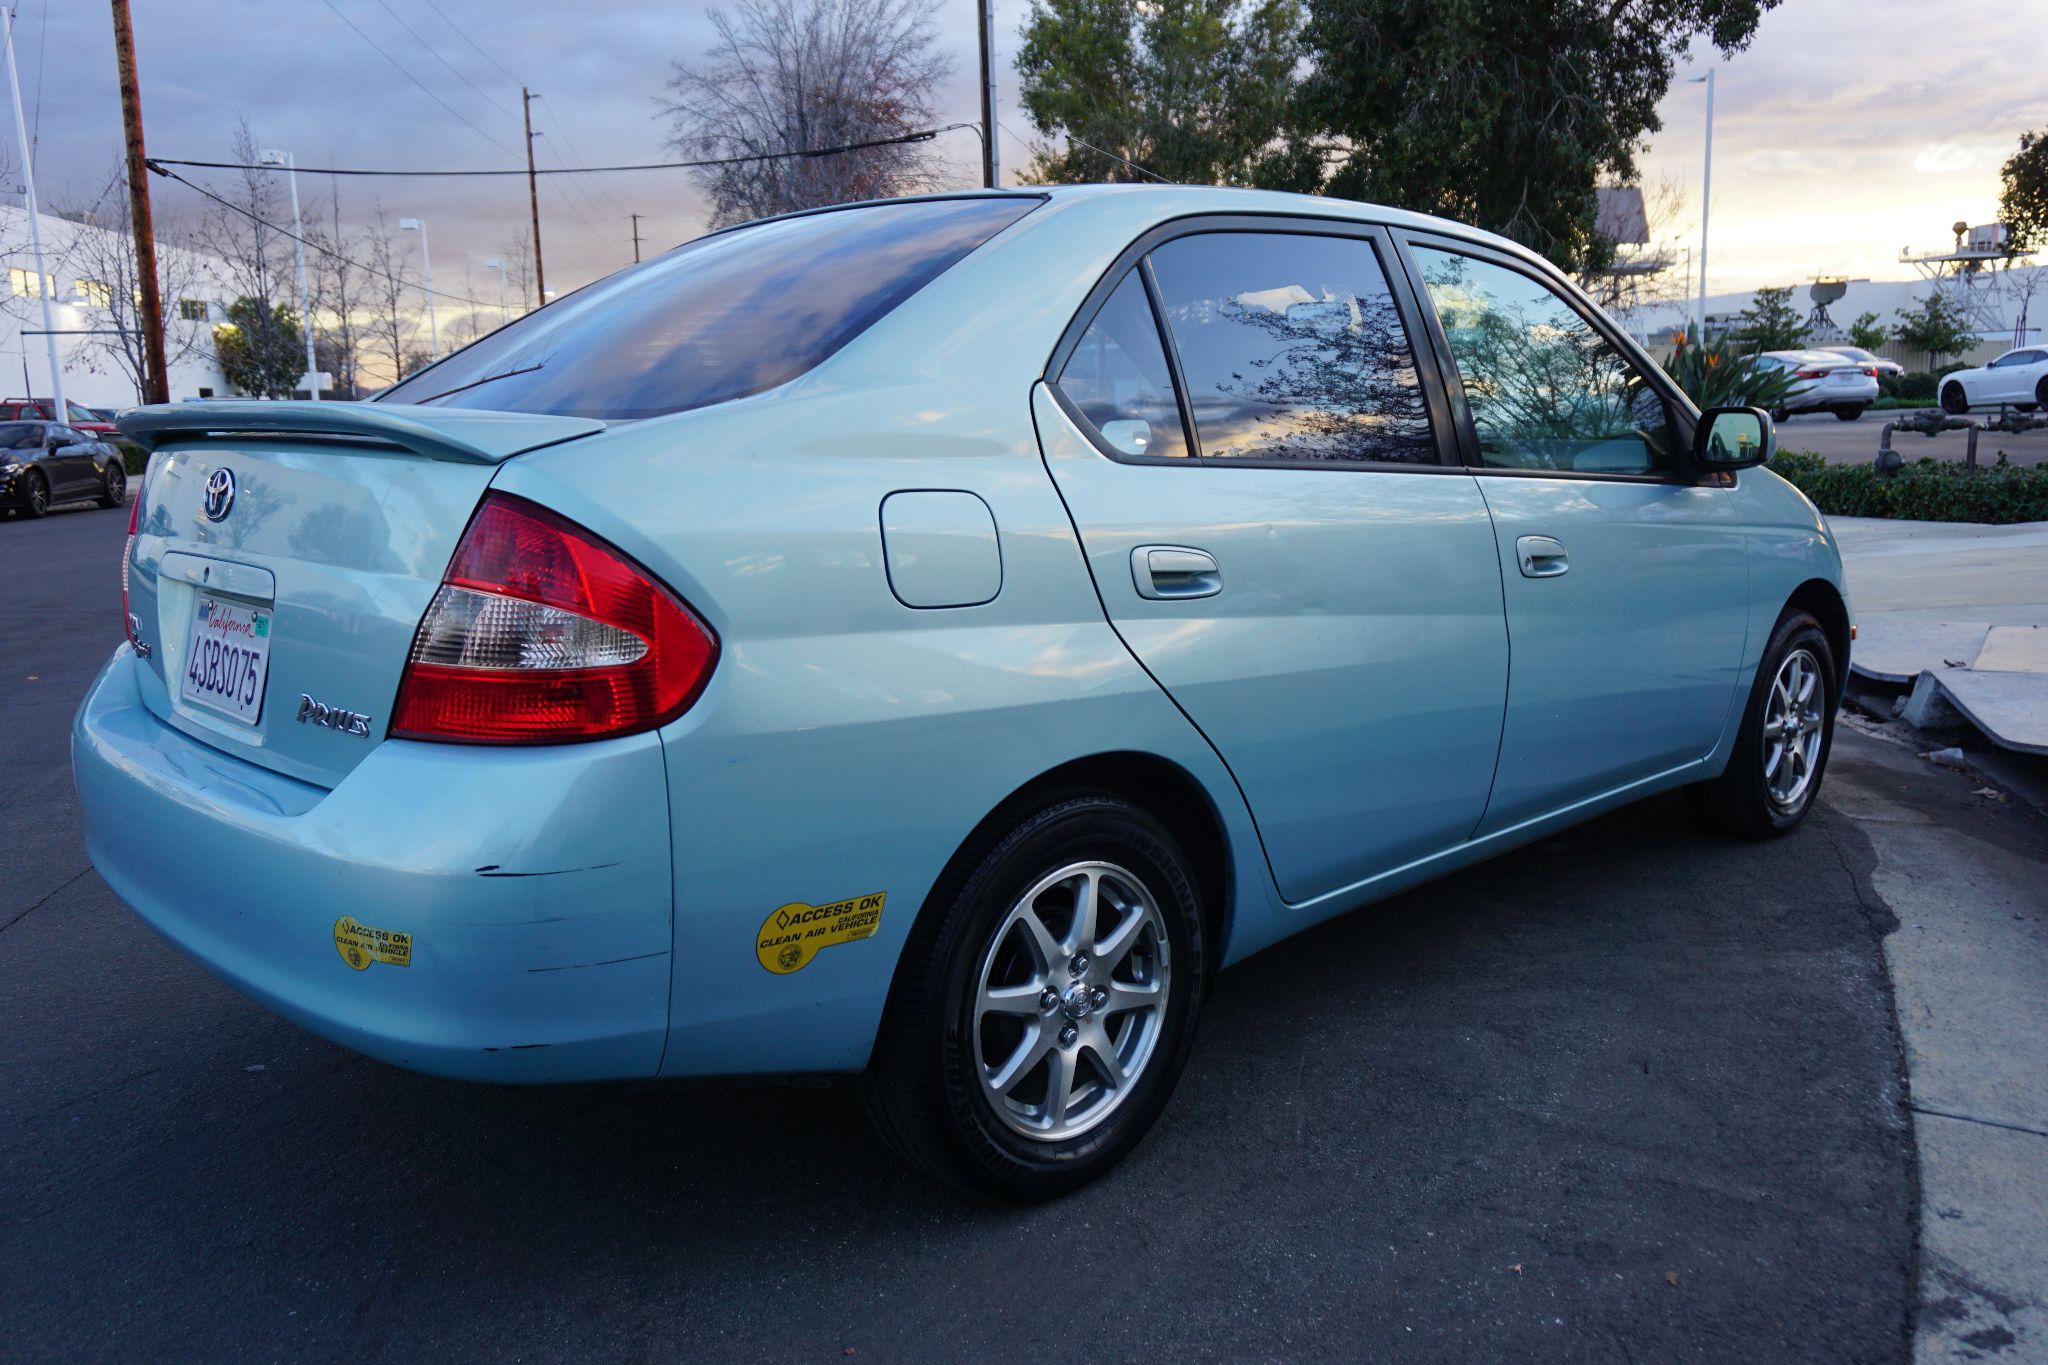 Used 2001 Toyota Prius GL at City Cars Warehouse INC